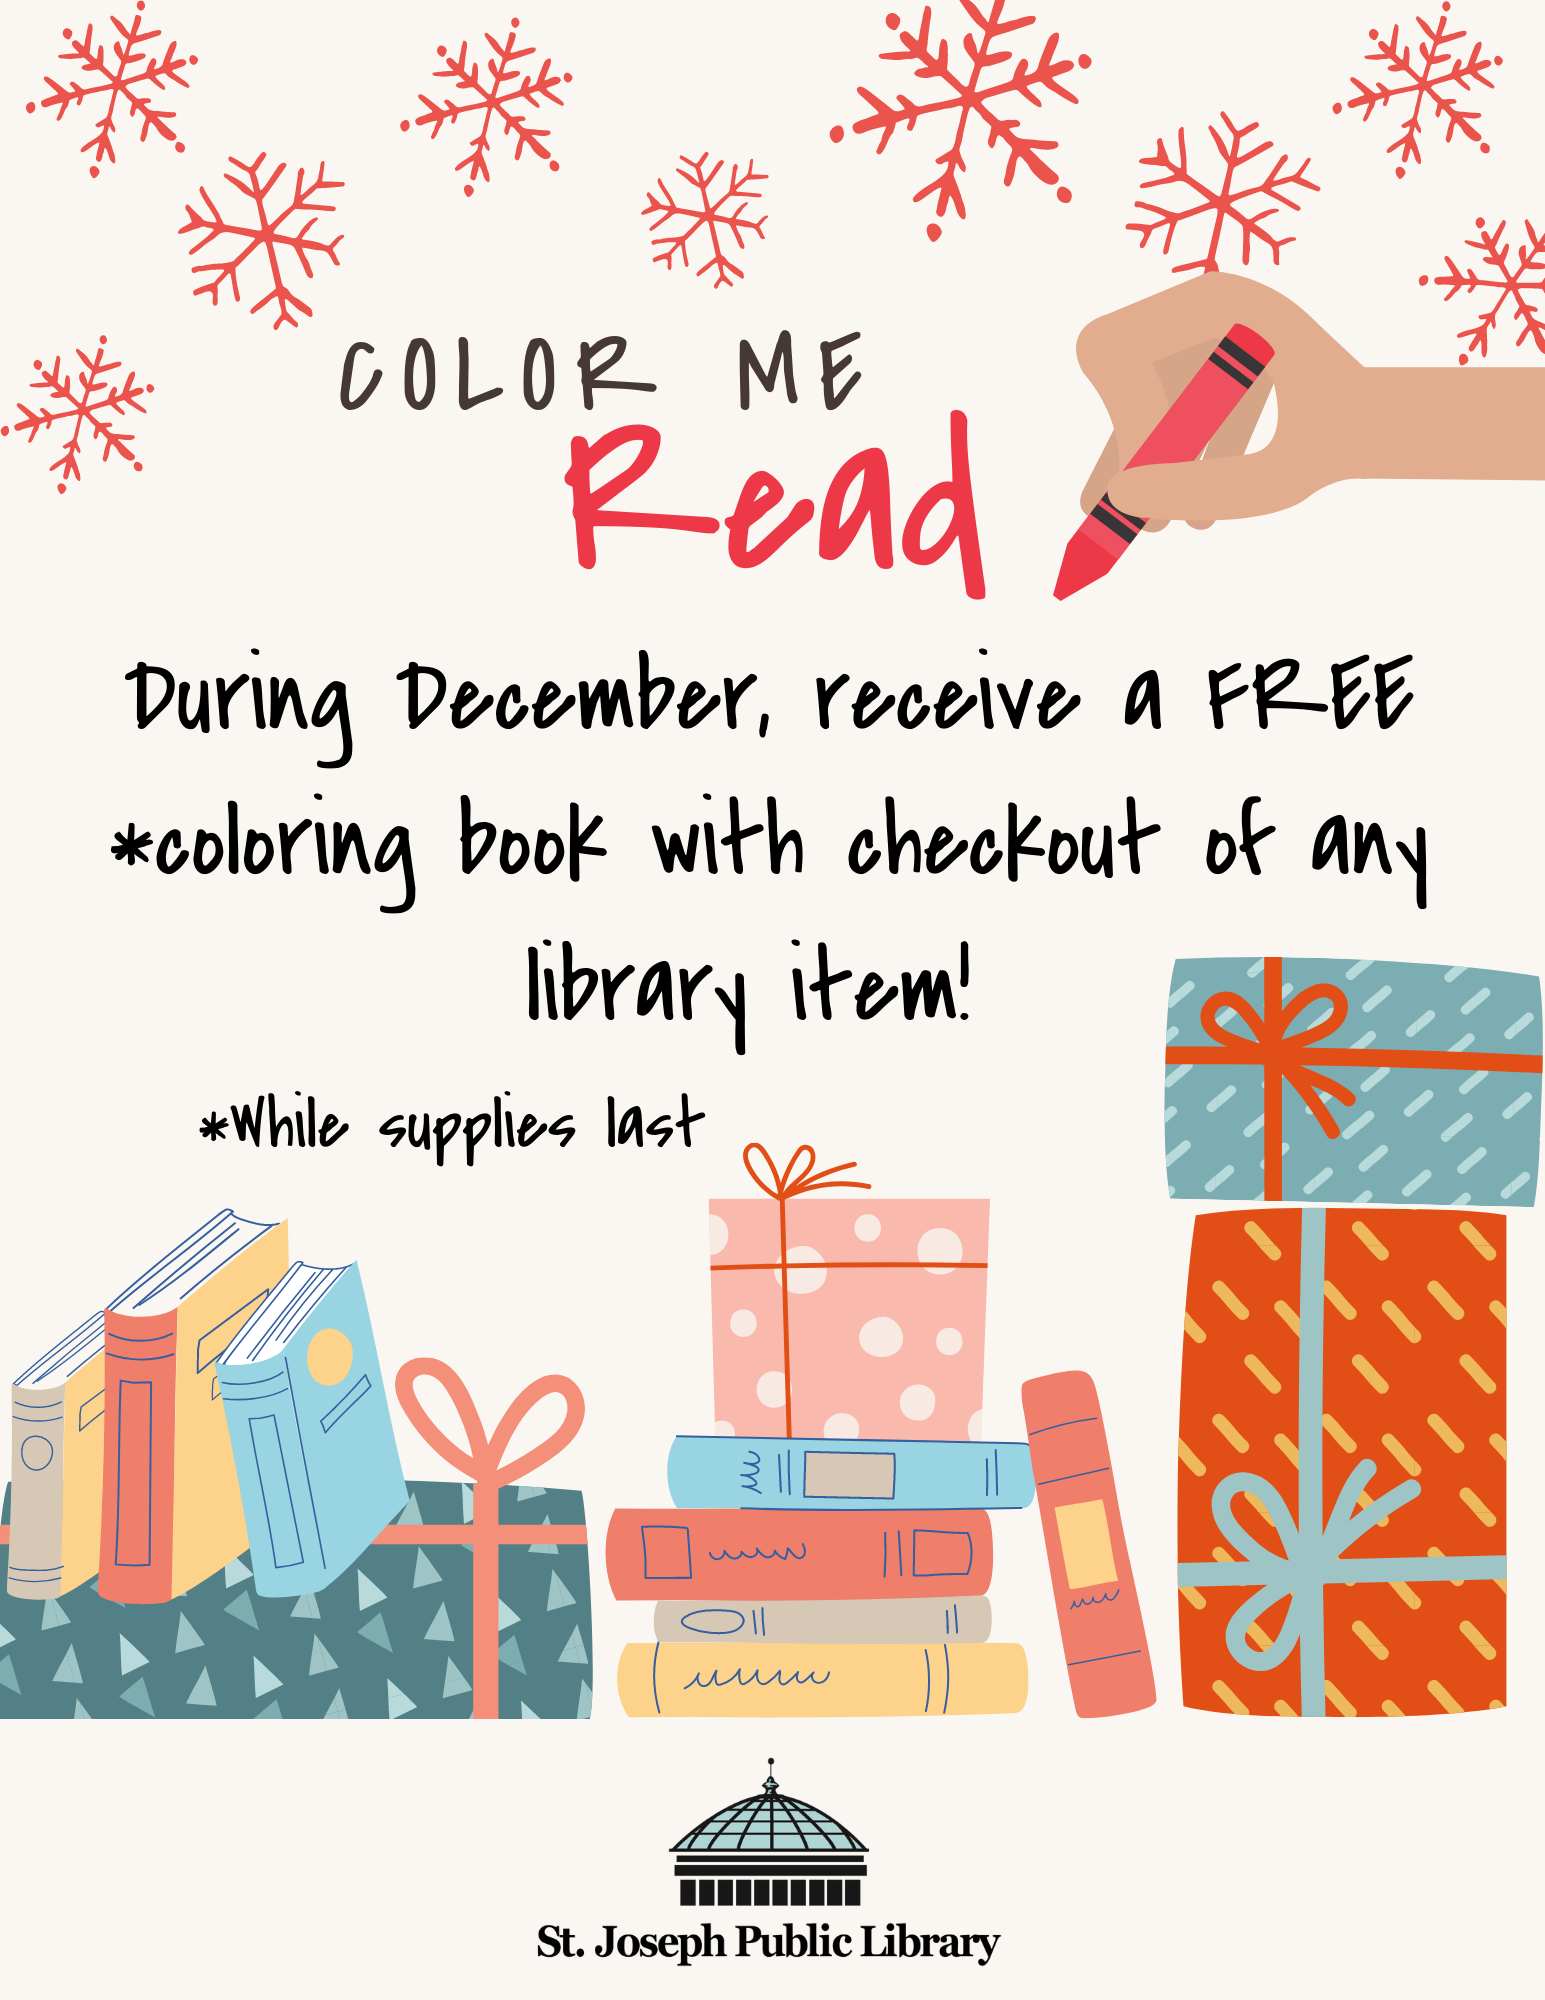 Check out any item from SJPL, receive a Free coloring book! While supplies last.